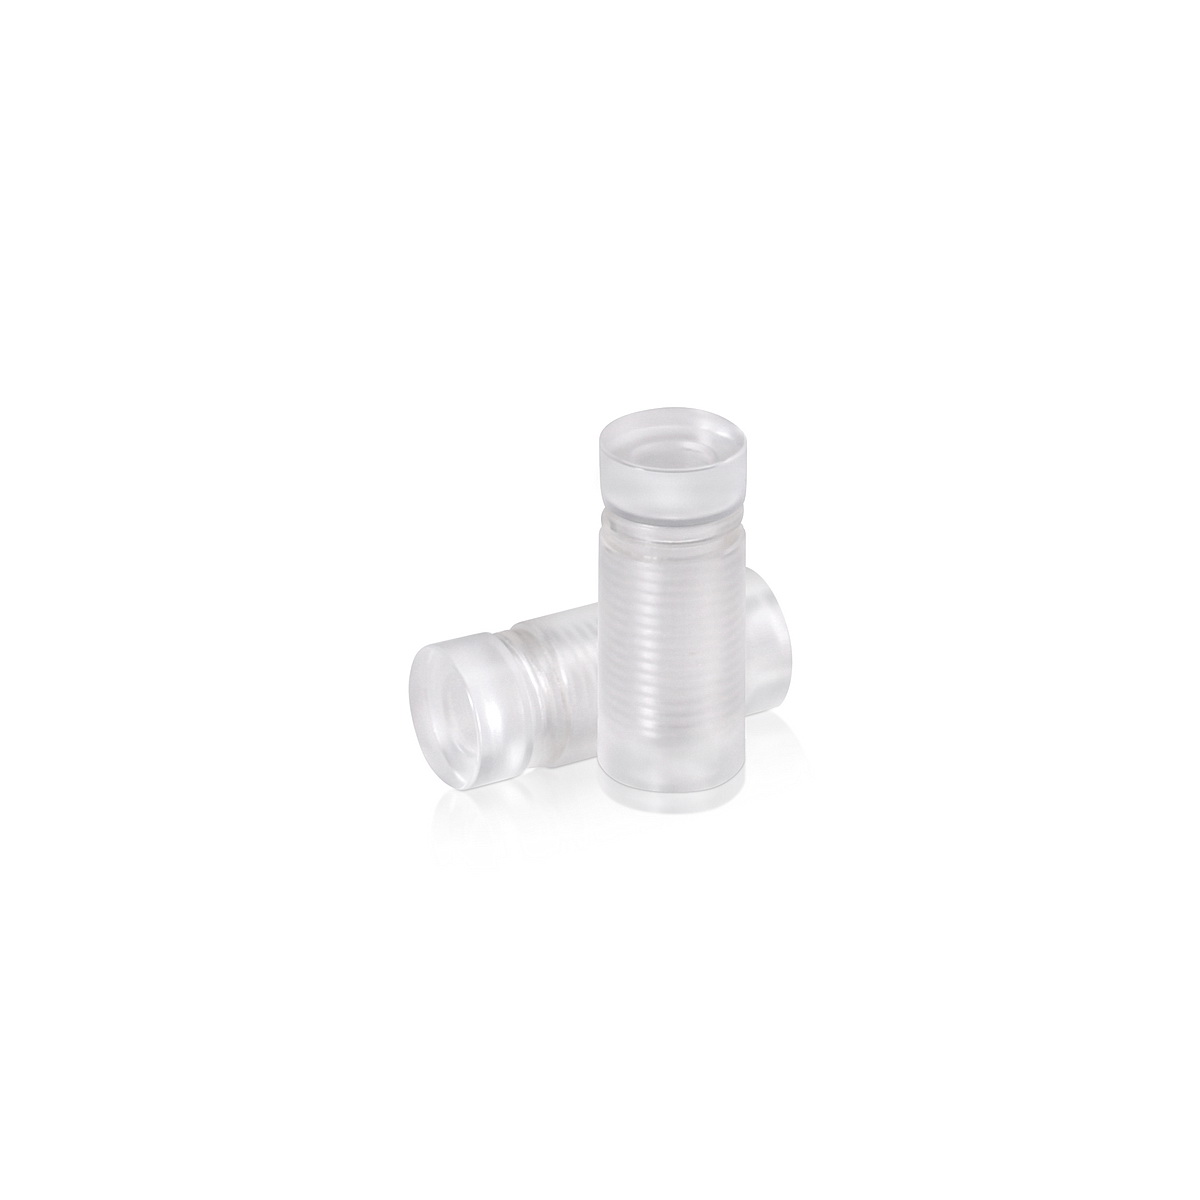 1/2'' Diameter X 1'' Barrel Length, Clear Acrylic Standoff. Easy Fasten Standoff (For Inside Use Only) Tamper Proof [Required Material Hole Size: 3/8'']